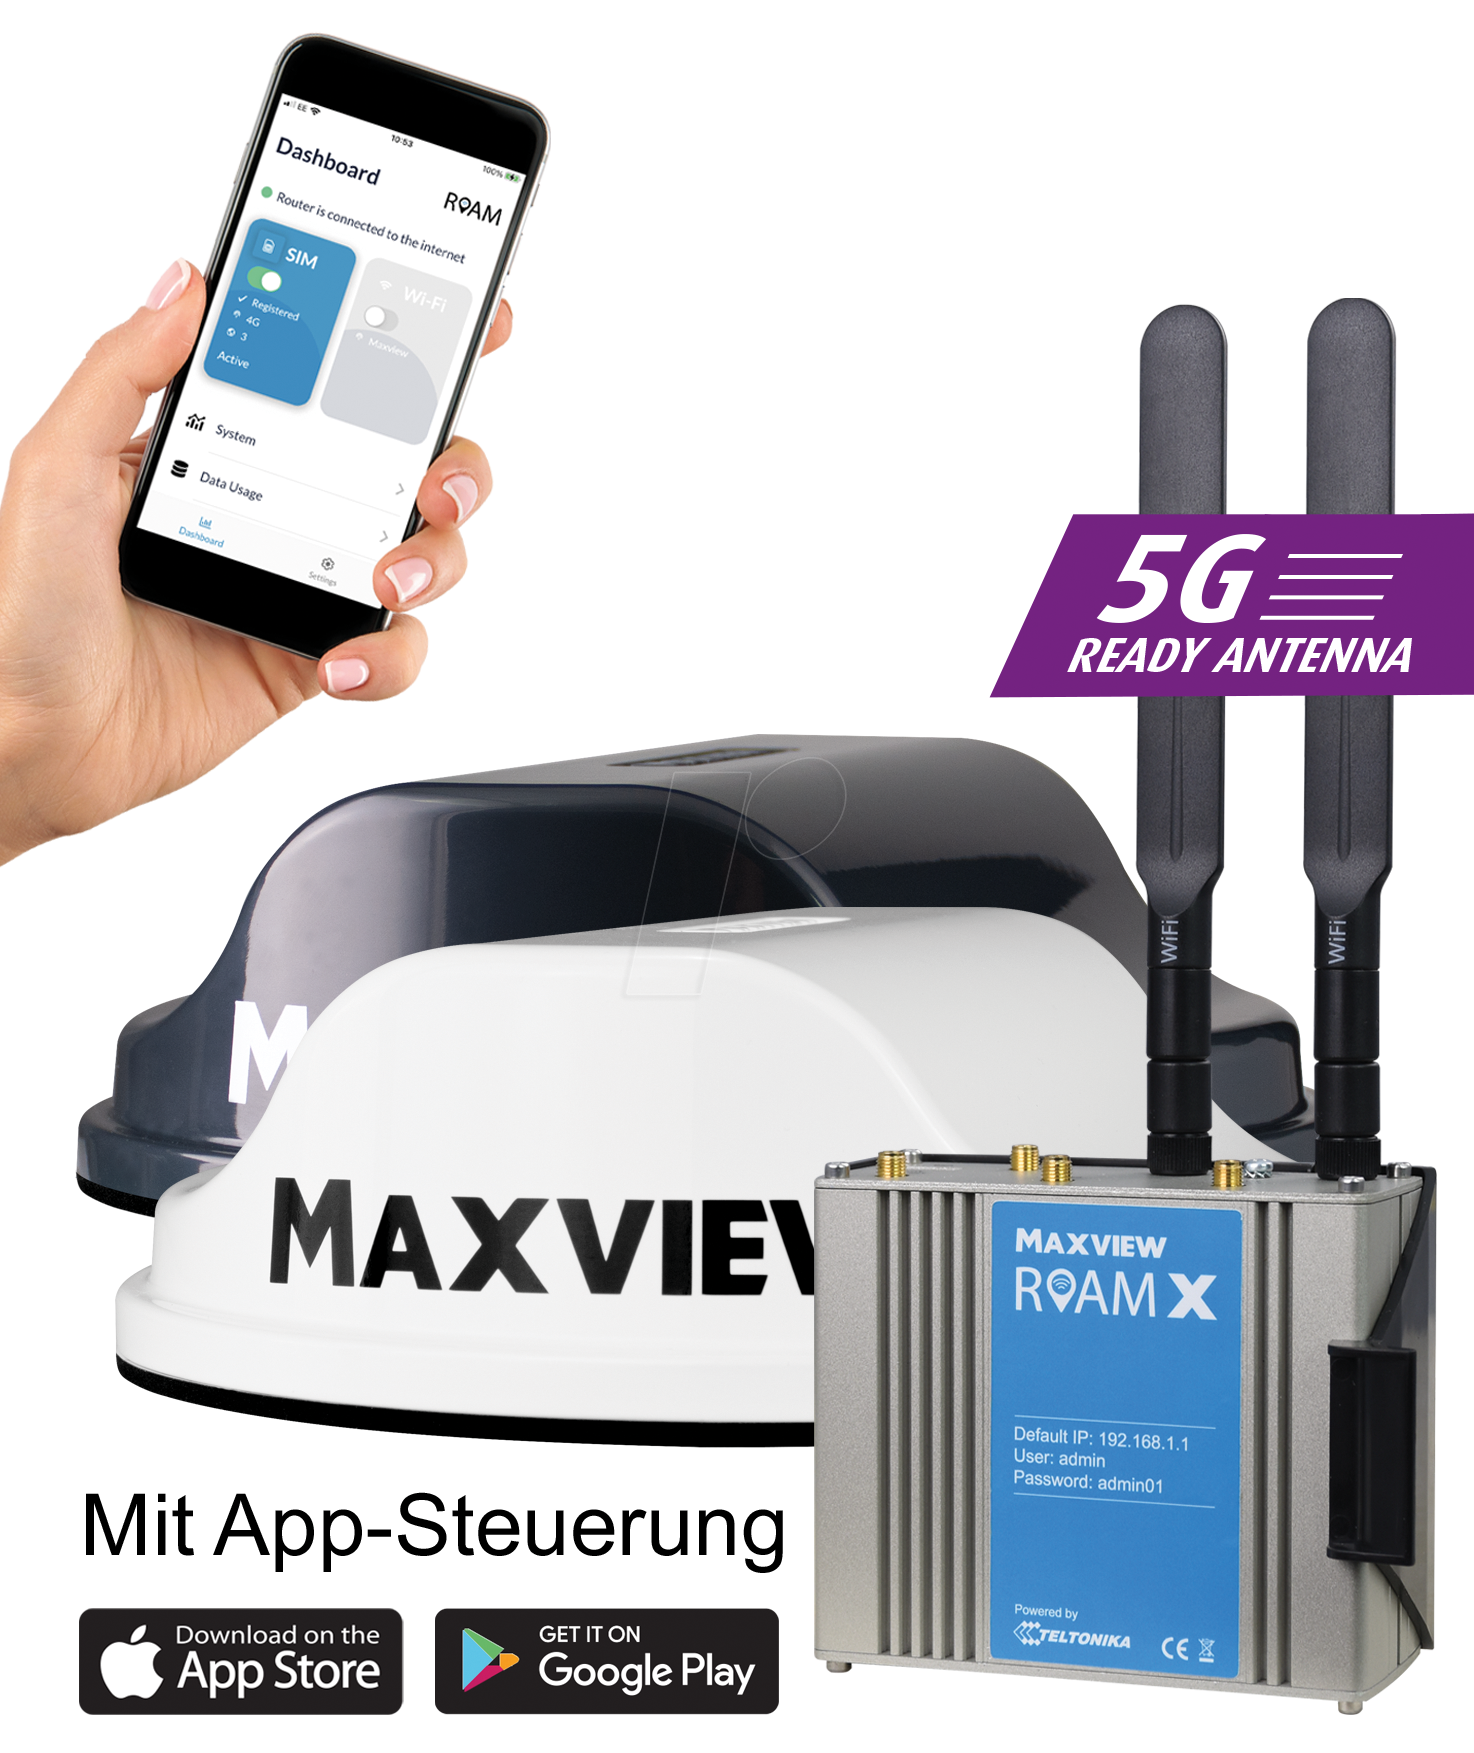 MAXVIEW 40009 - Camping / Boot WLAN-Router 4G 300 MBit/s von Maxview